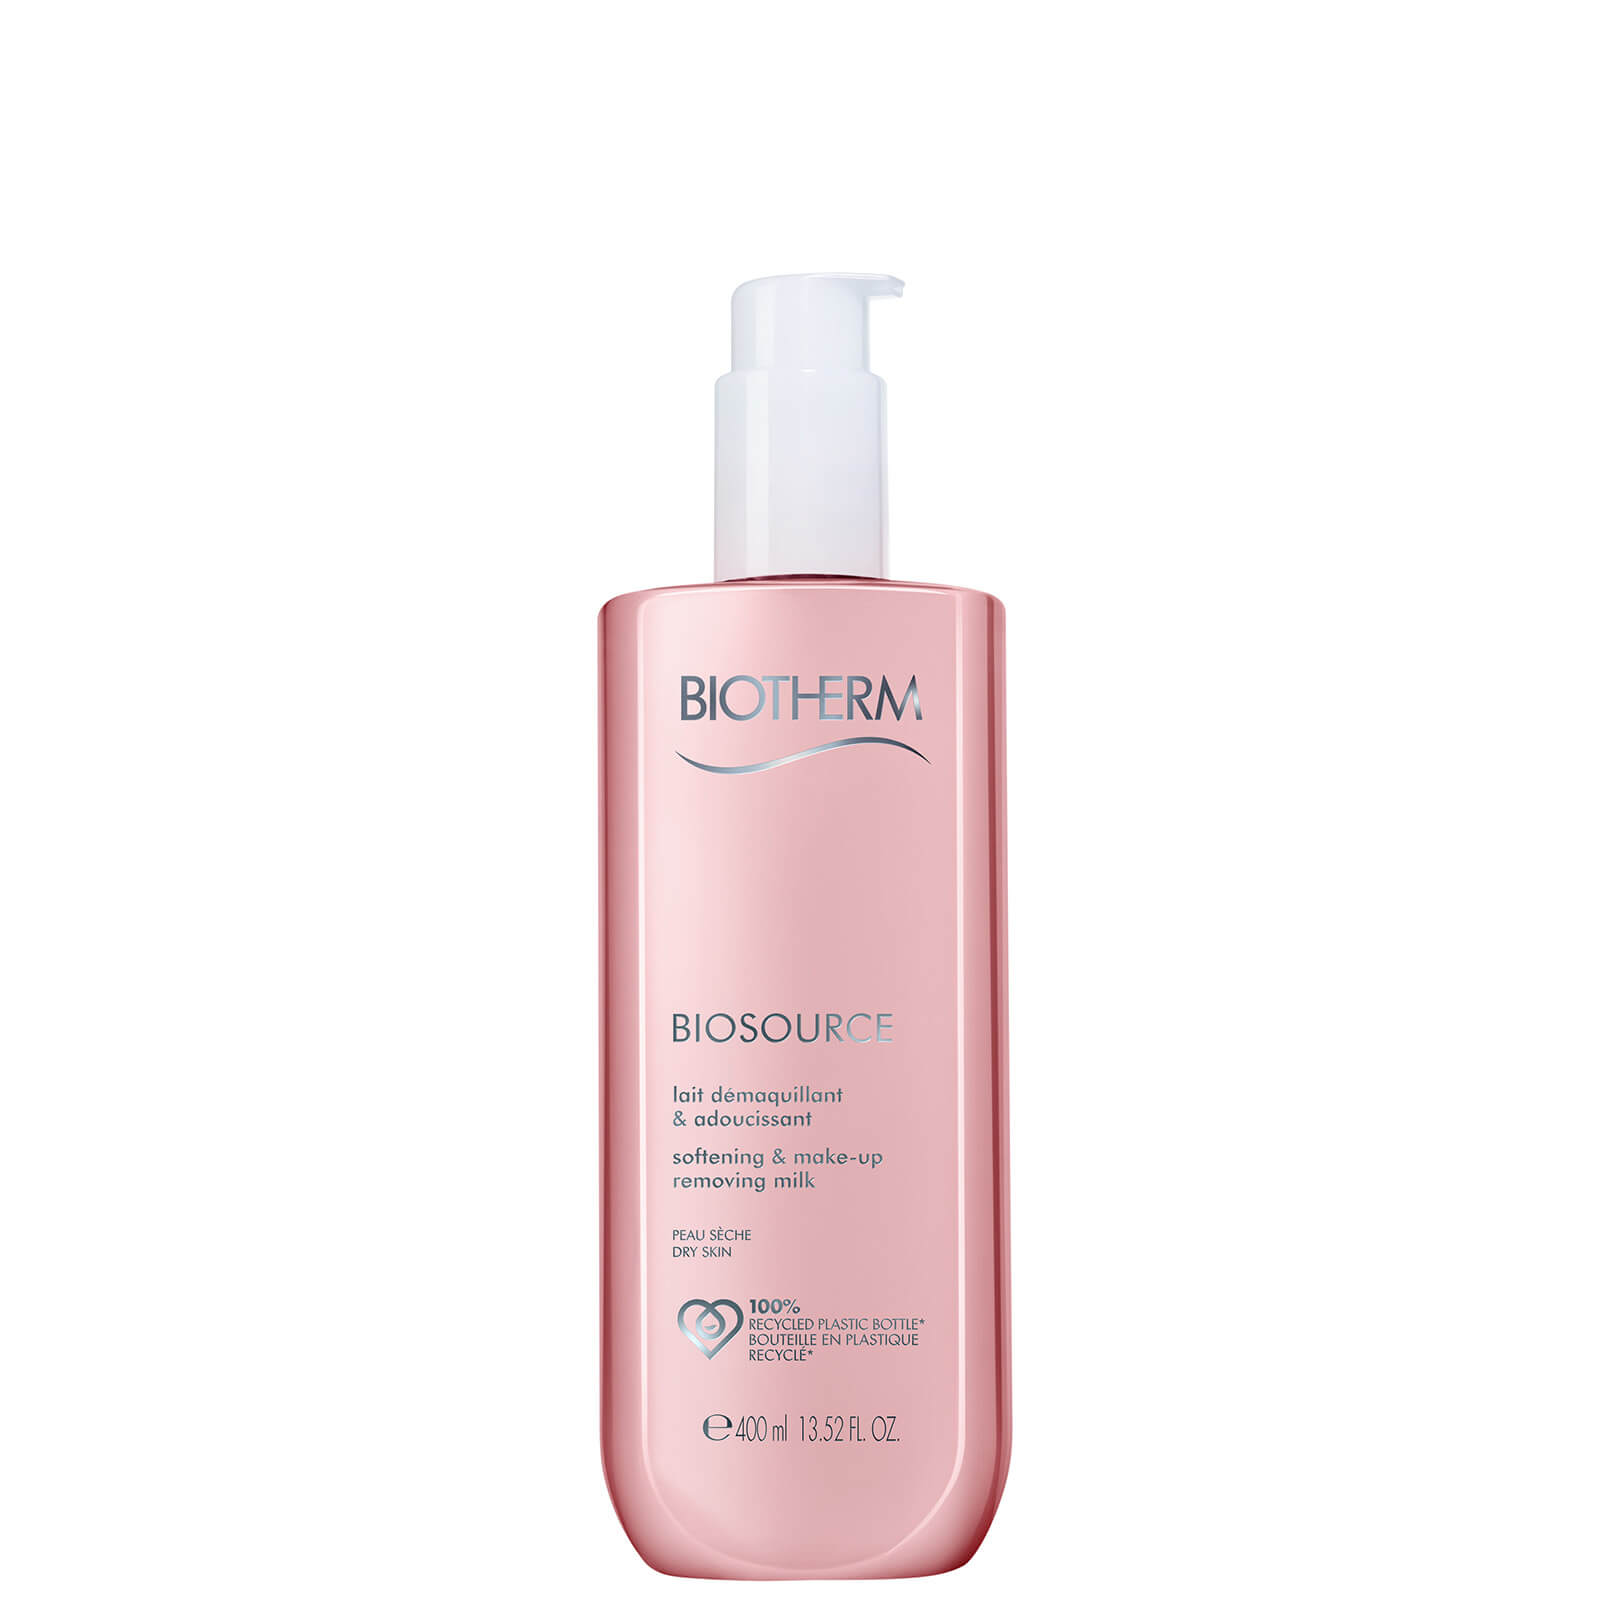 Image of Biotherm Biosource Softening and Makeup Removing Milk 400ml